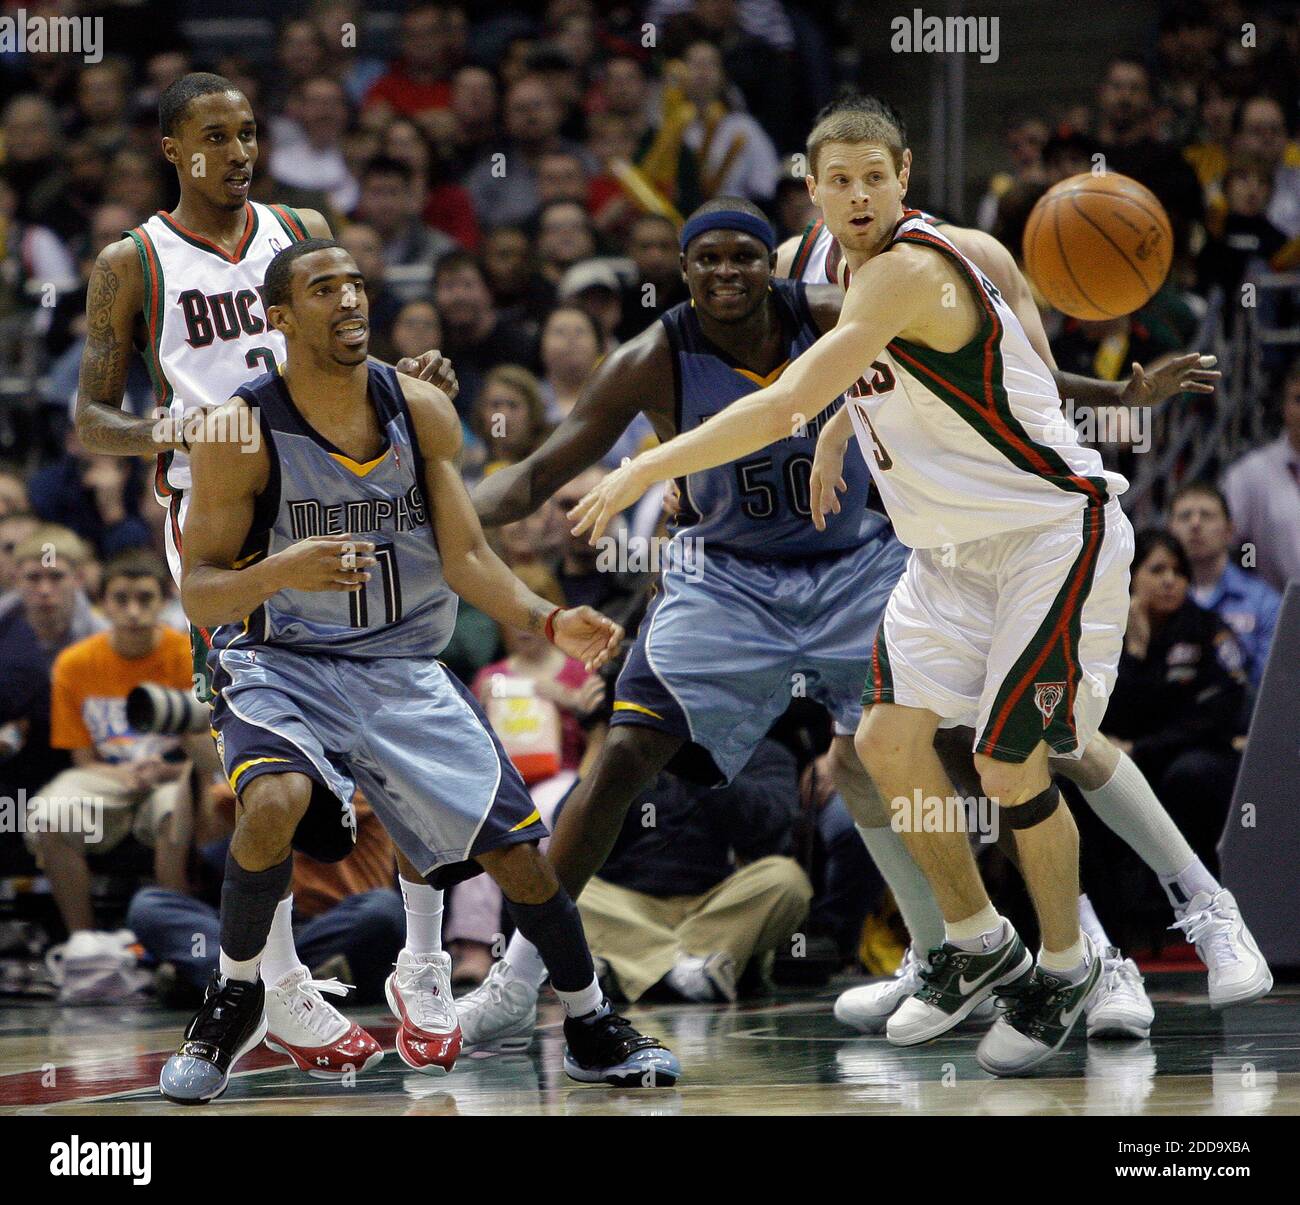 NO FILM, NO VIDEO, NO TV, NO DOCUMENTARY - Milwaukee Bucks' Brandon Jennings and Luke Ridnour guard Memphis Grizzlies' Mike Conley and Zach Randolph during an NBA game at the Bradley Center in Milwaukee, WI, USA on March 28, 2010. Photo by Benny Sieu/Milwaukee Journal Sentinel/MCT/Cameleon/ABACAPRESS.COM Stock Photo